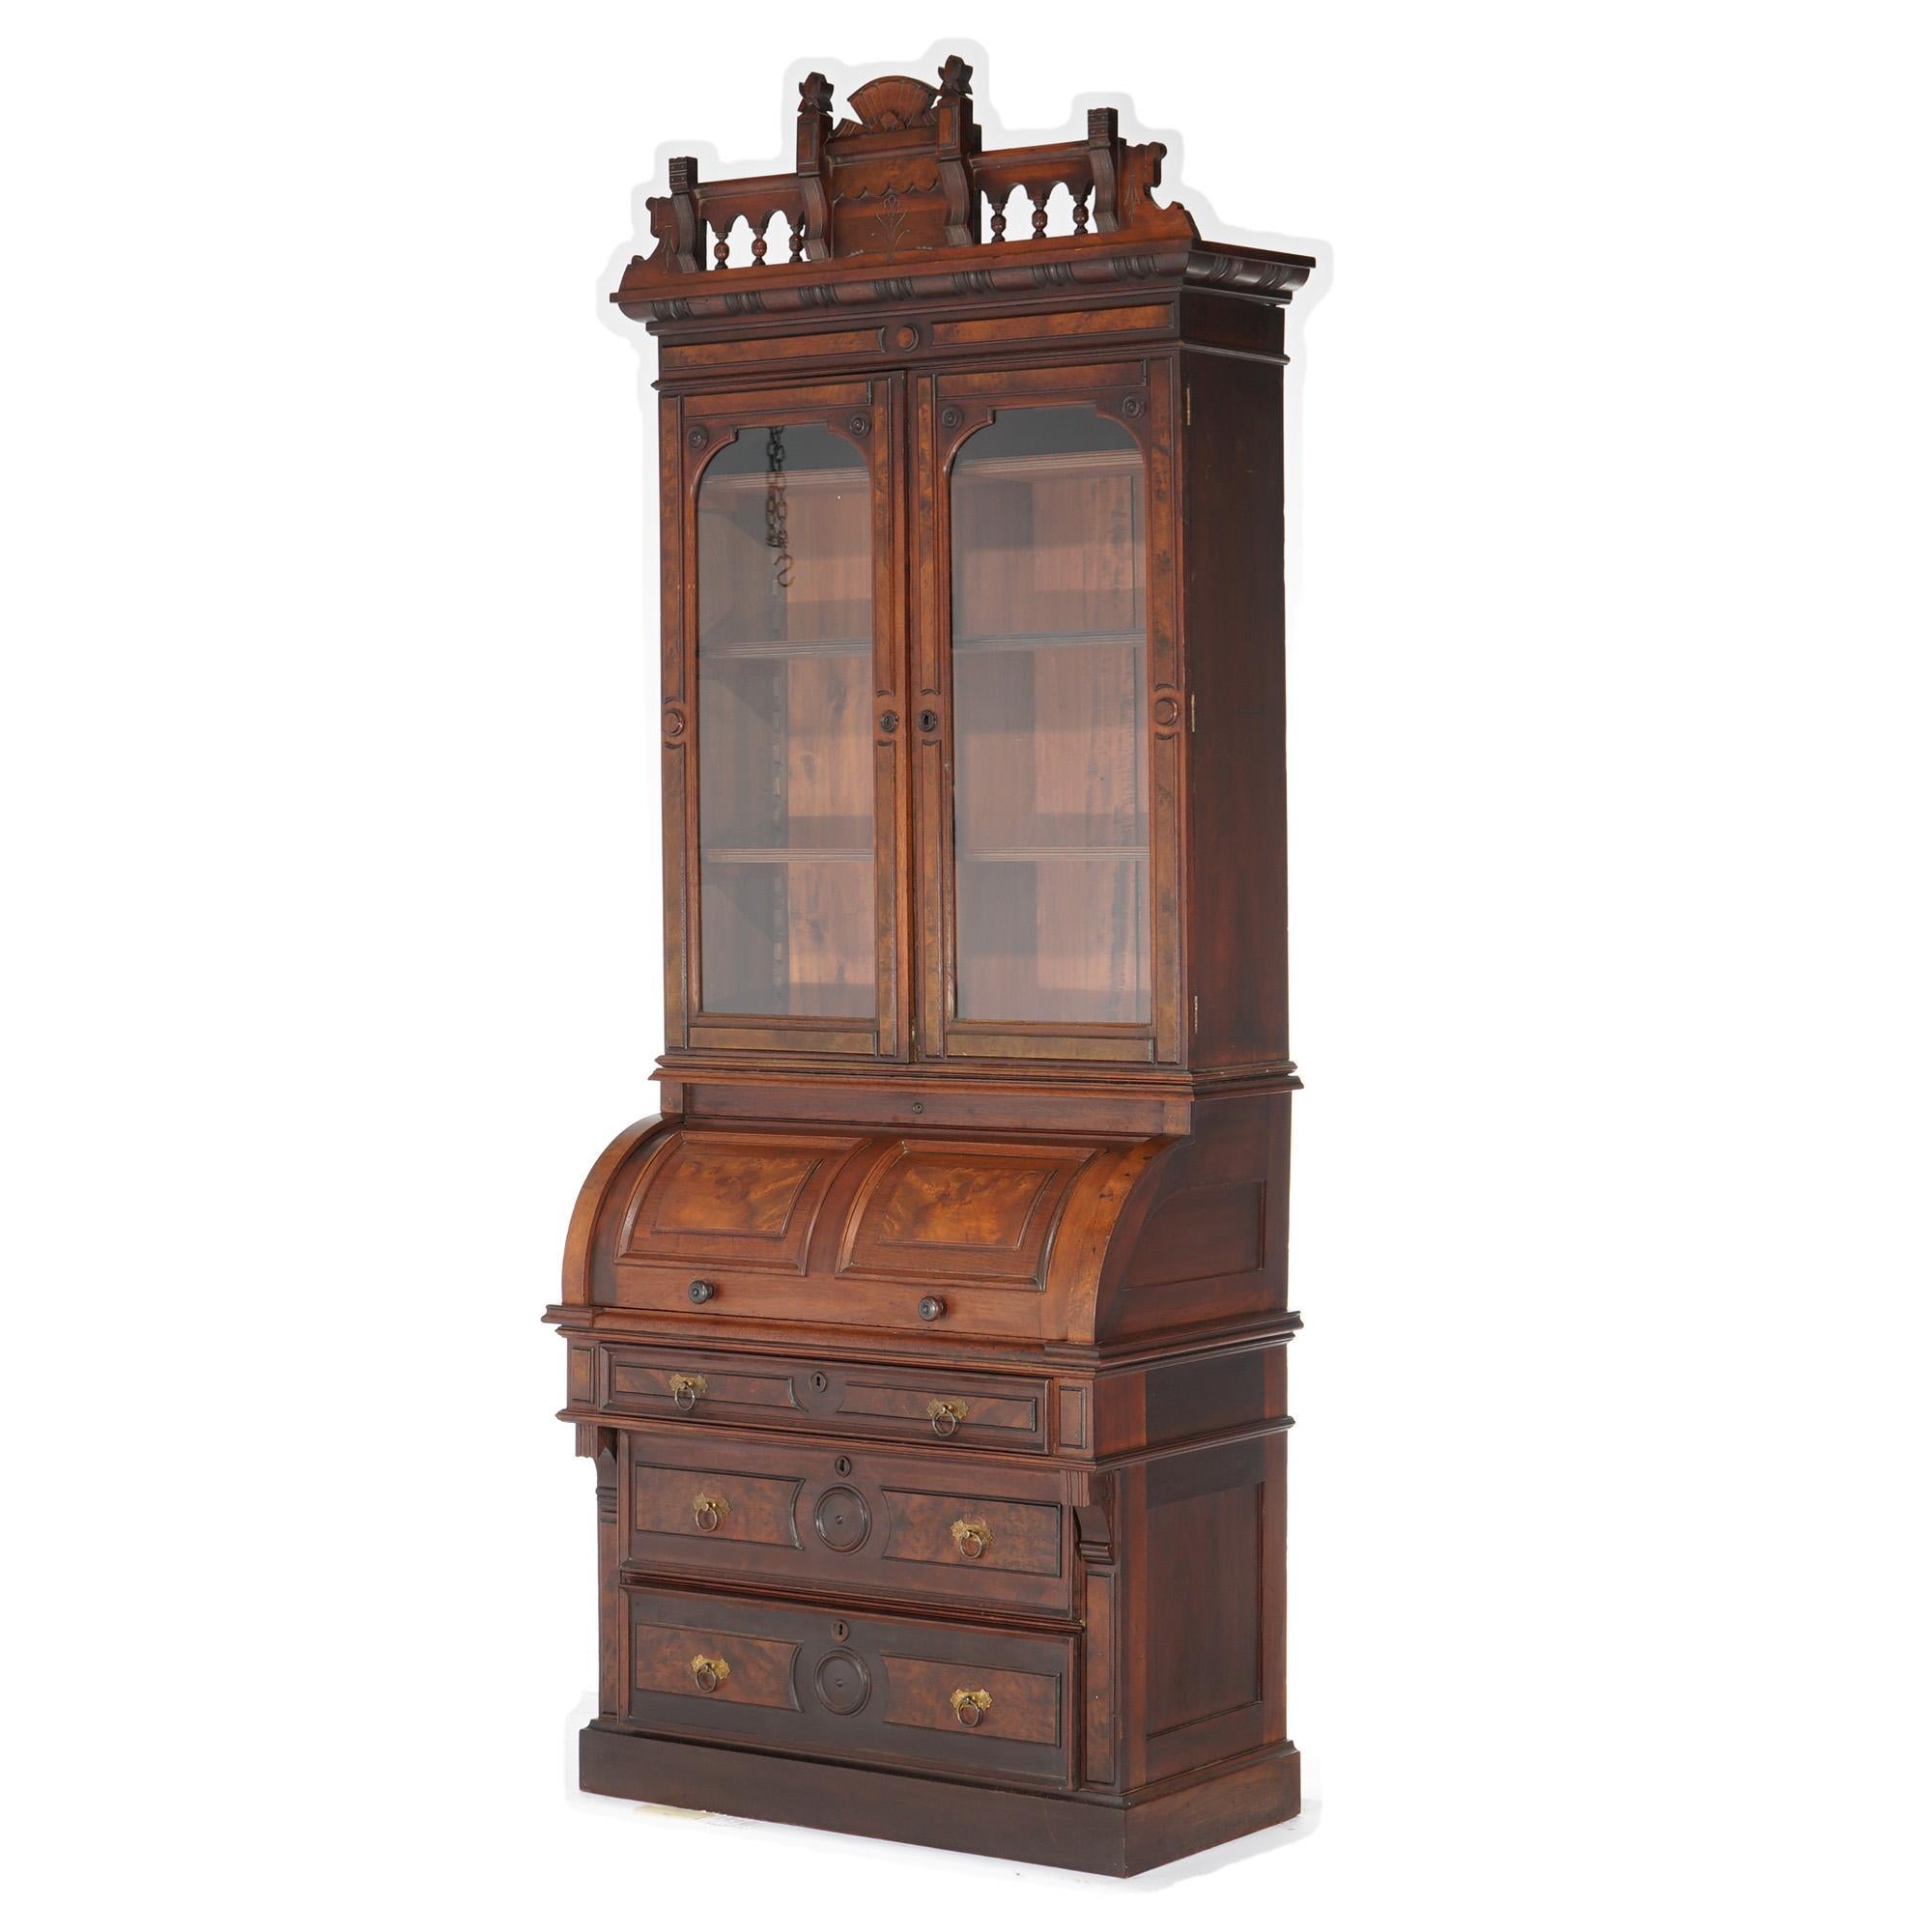 An antique Eastlake secretary offers walnut and burl construction with upper having double glass door bookcase over barrel roll desk with lower long drawers, incised decoration throughout, c1880

Measures- 99.5''H x 38.25''W x 21.25''D

Catalogue